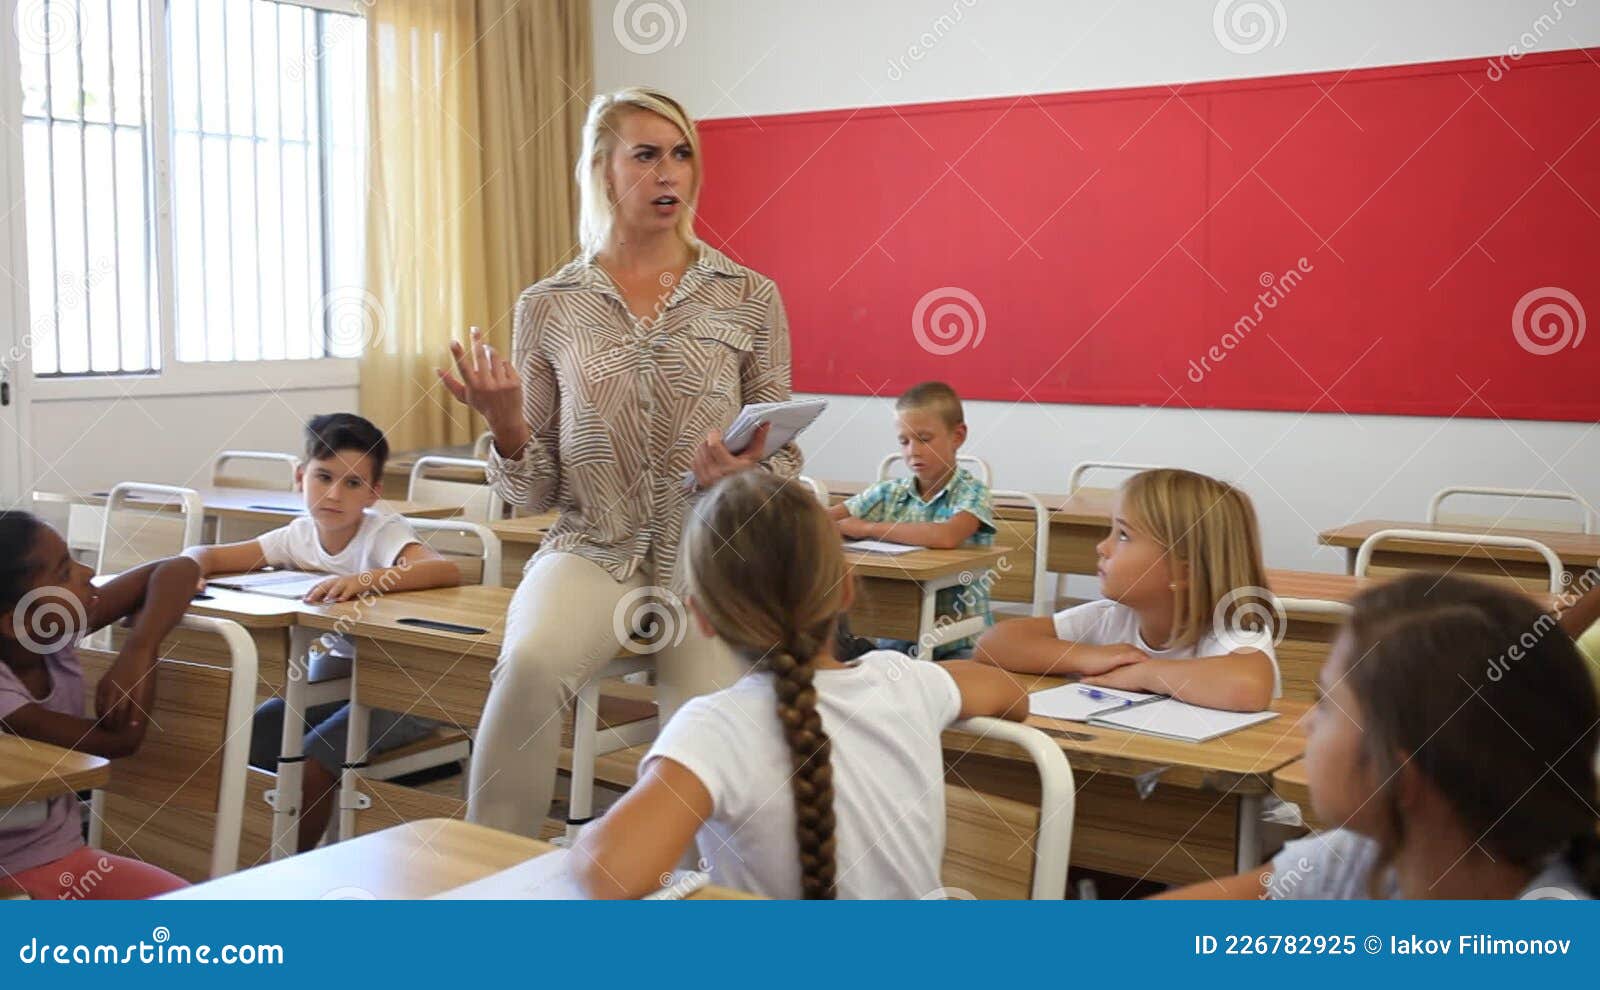 Female Teacher Talking With Primary School Pupils In Classroom Stock